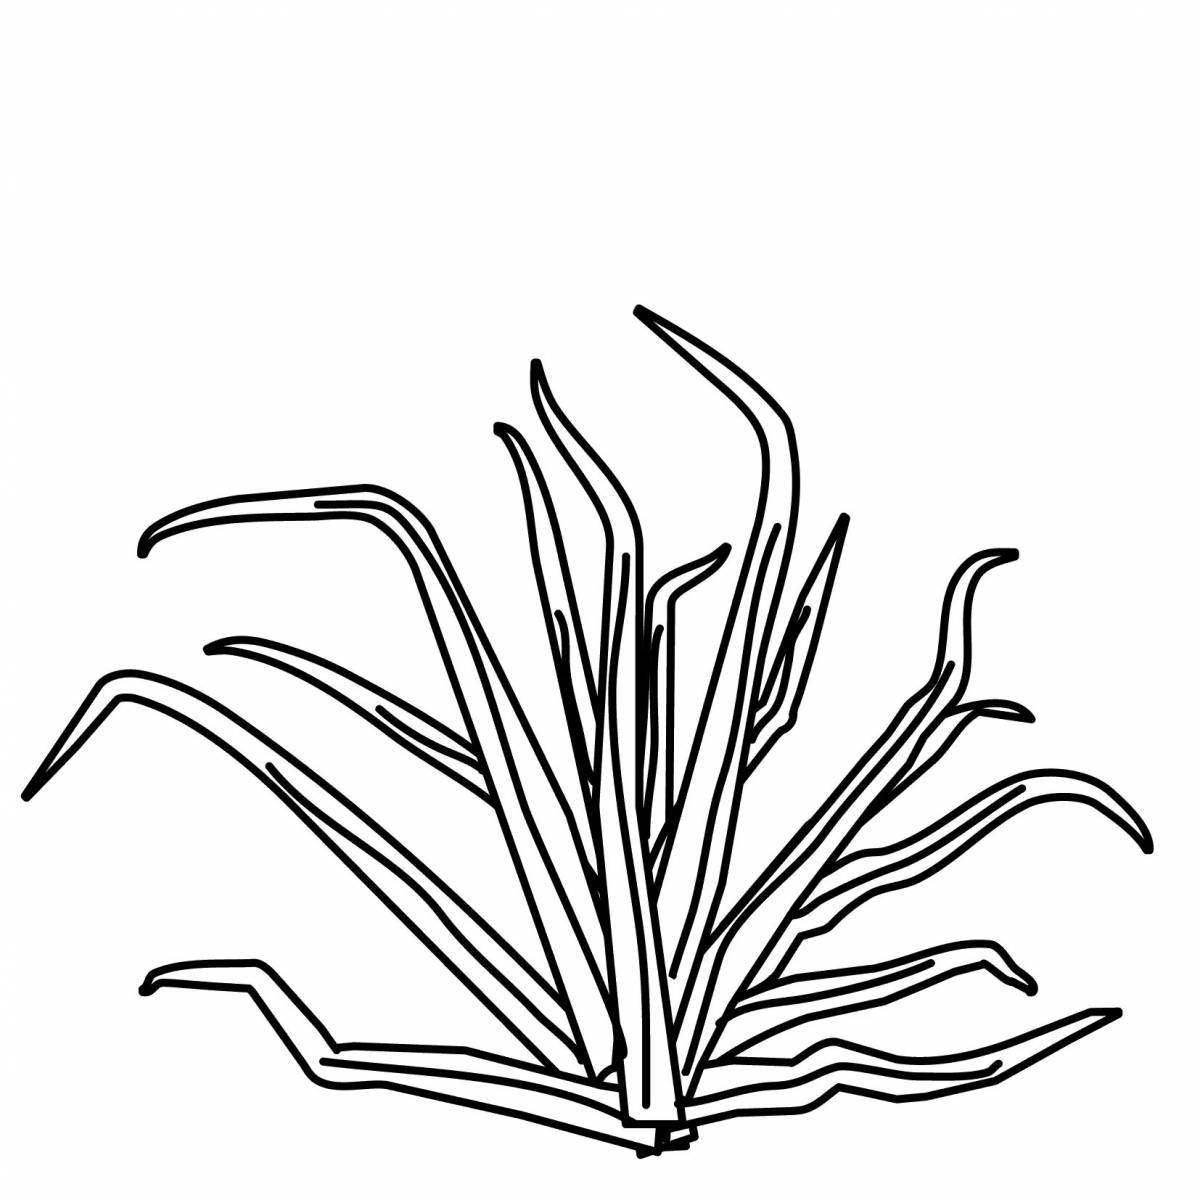 Playful weed coloring page for kids